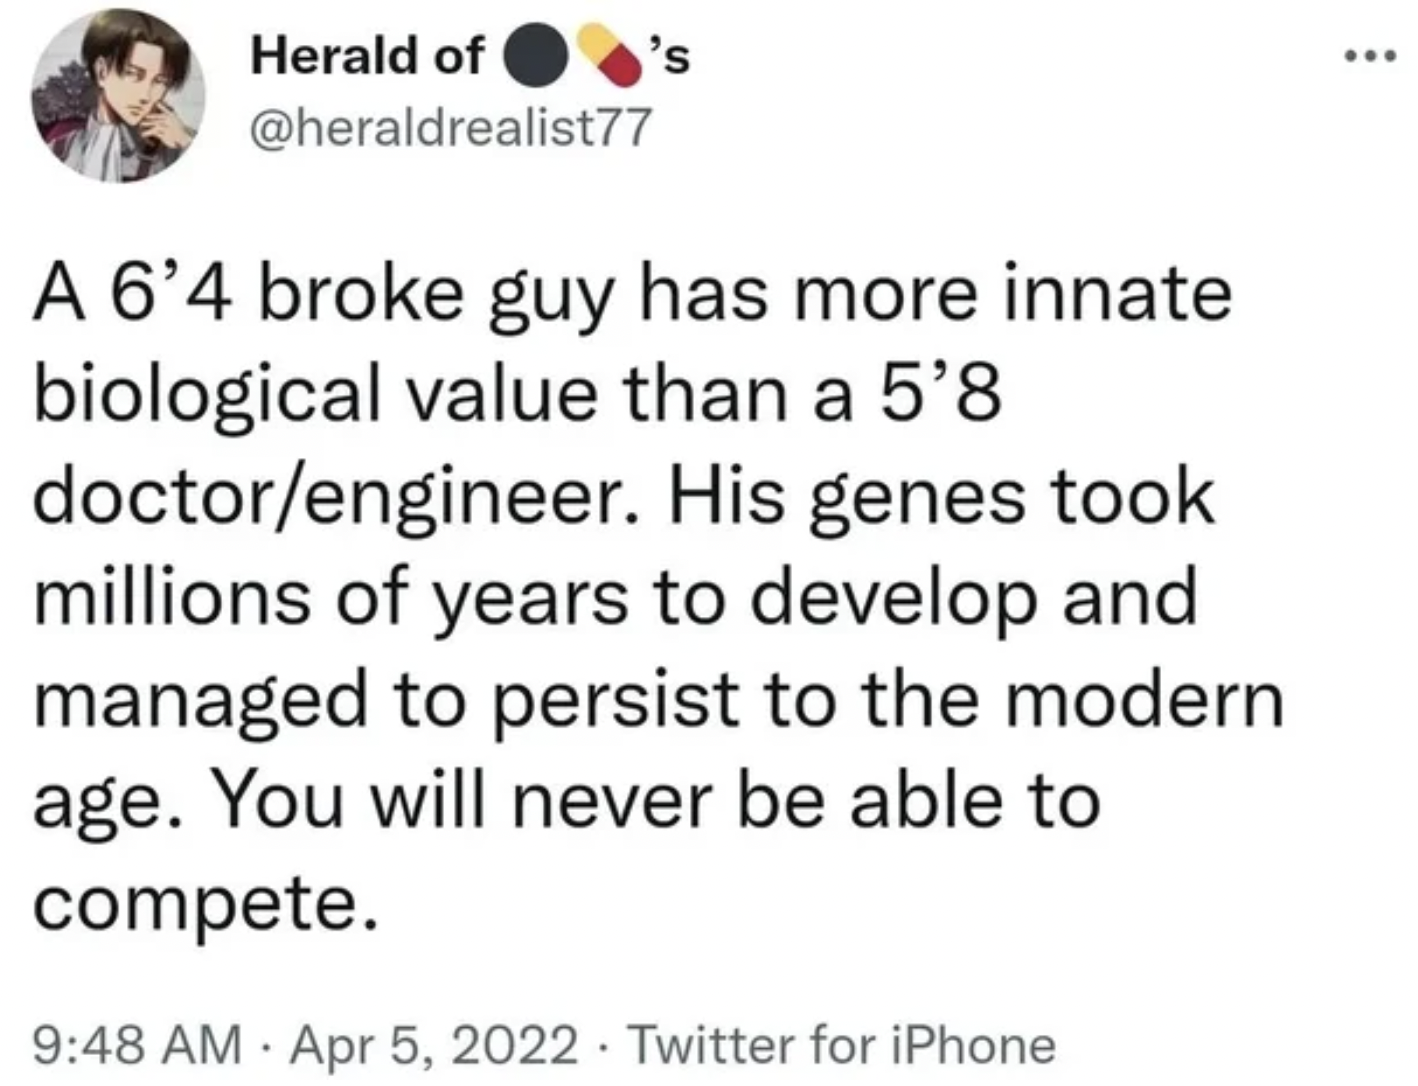 facepalms and fails - funny twitter post - Herald of 's A 6'4 broke guy has more innate biological value than a 5'8 doctorengineer. His genes took millions of years to develop and managed to persist to the modern age. You will never be able to compete. Tw